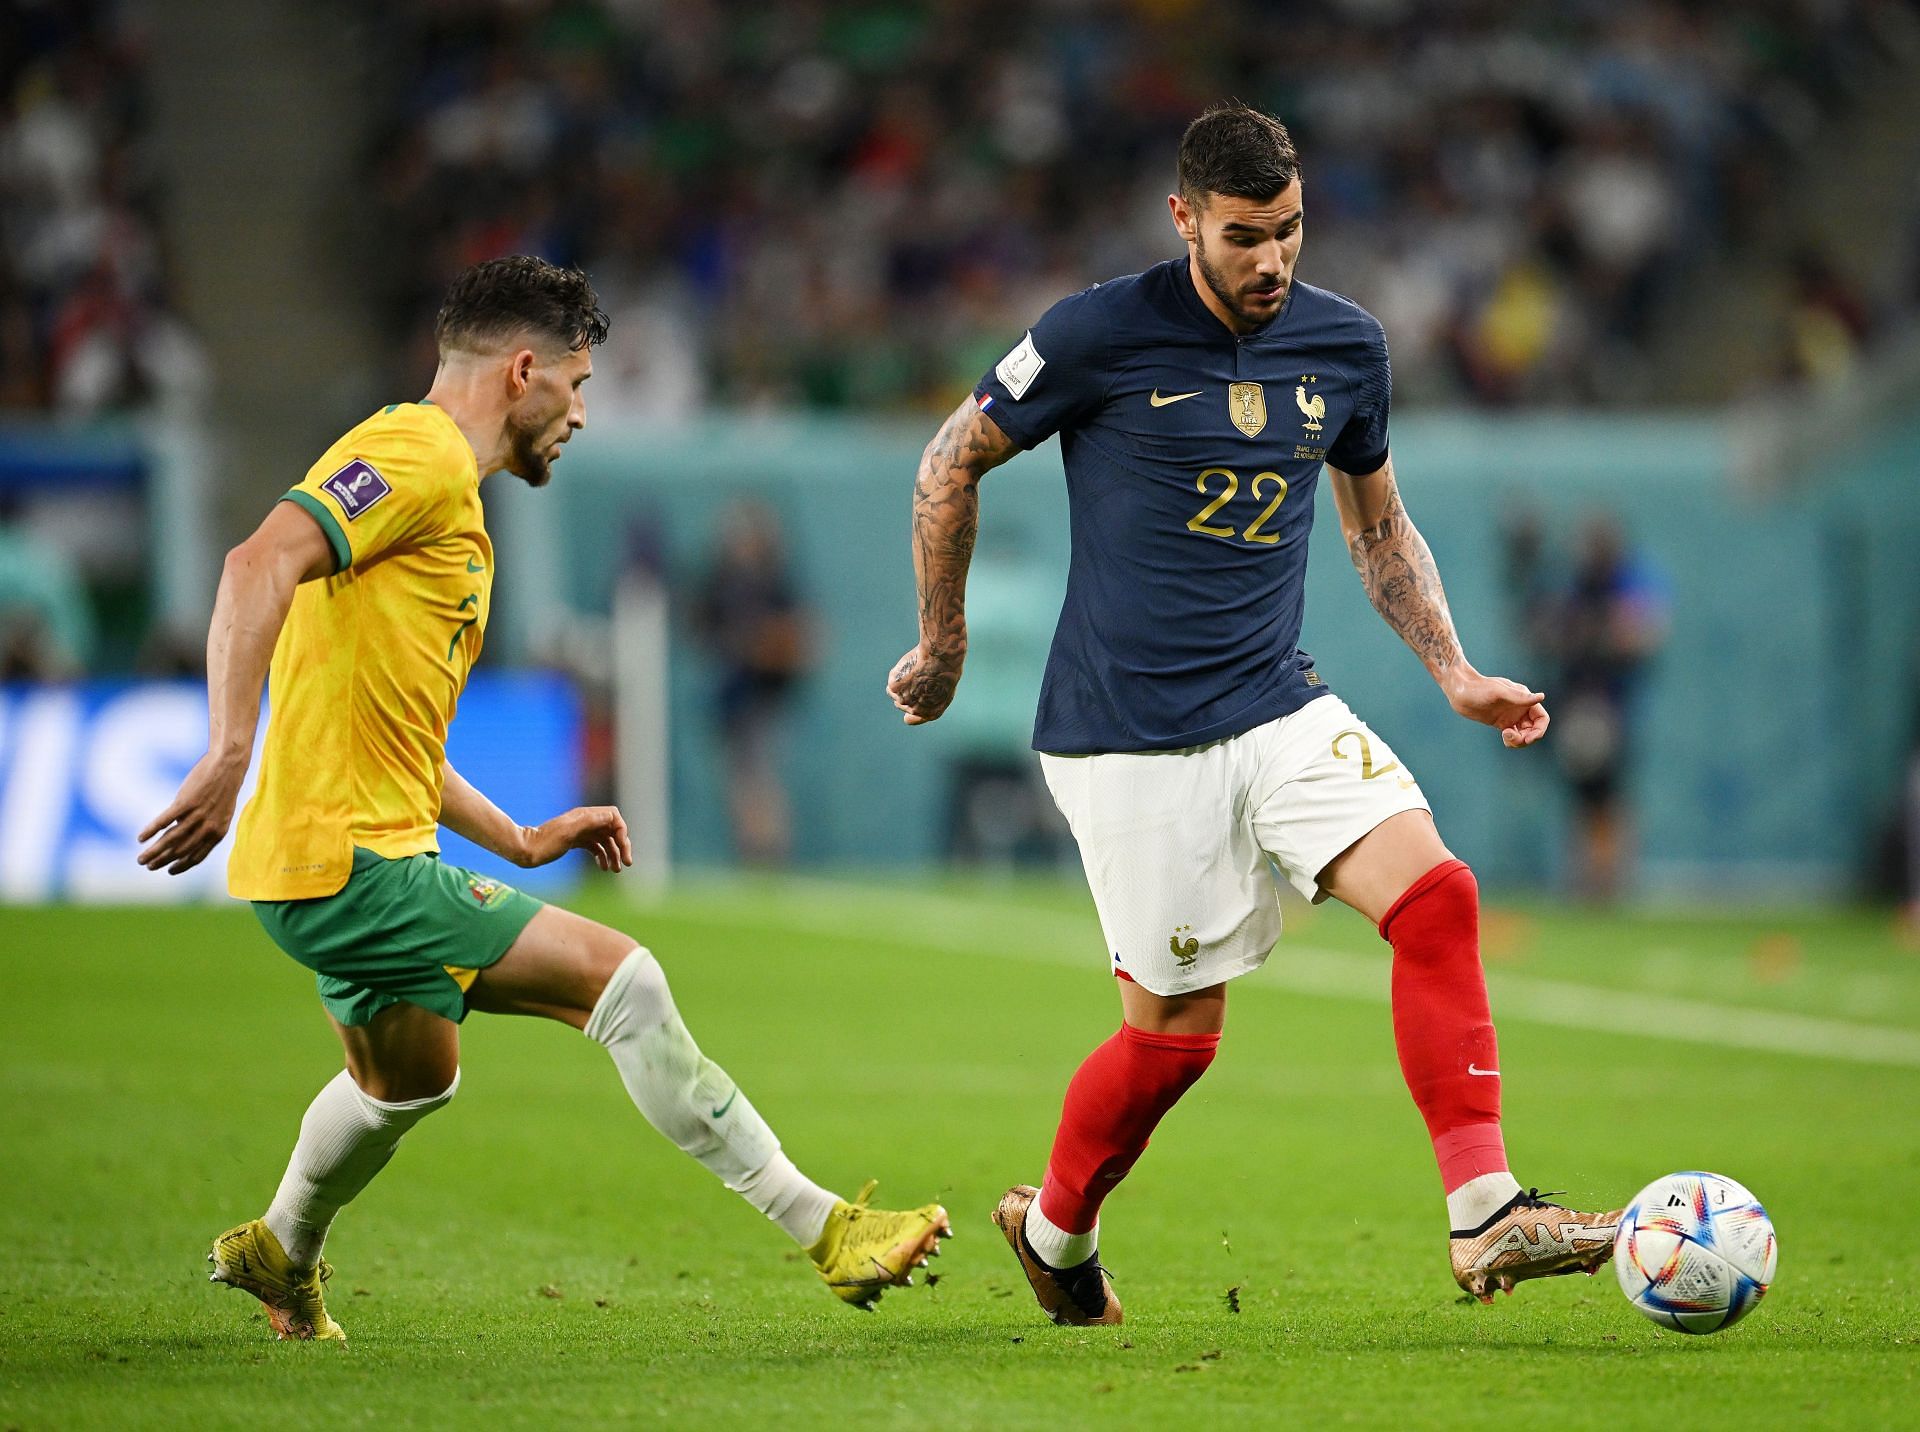 Hernandez (R) shone at left-back after replacing his brother for France early on in the game.